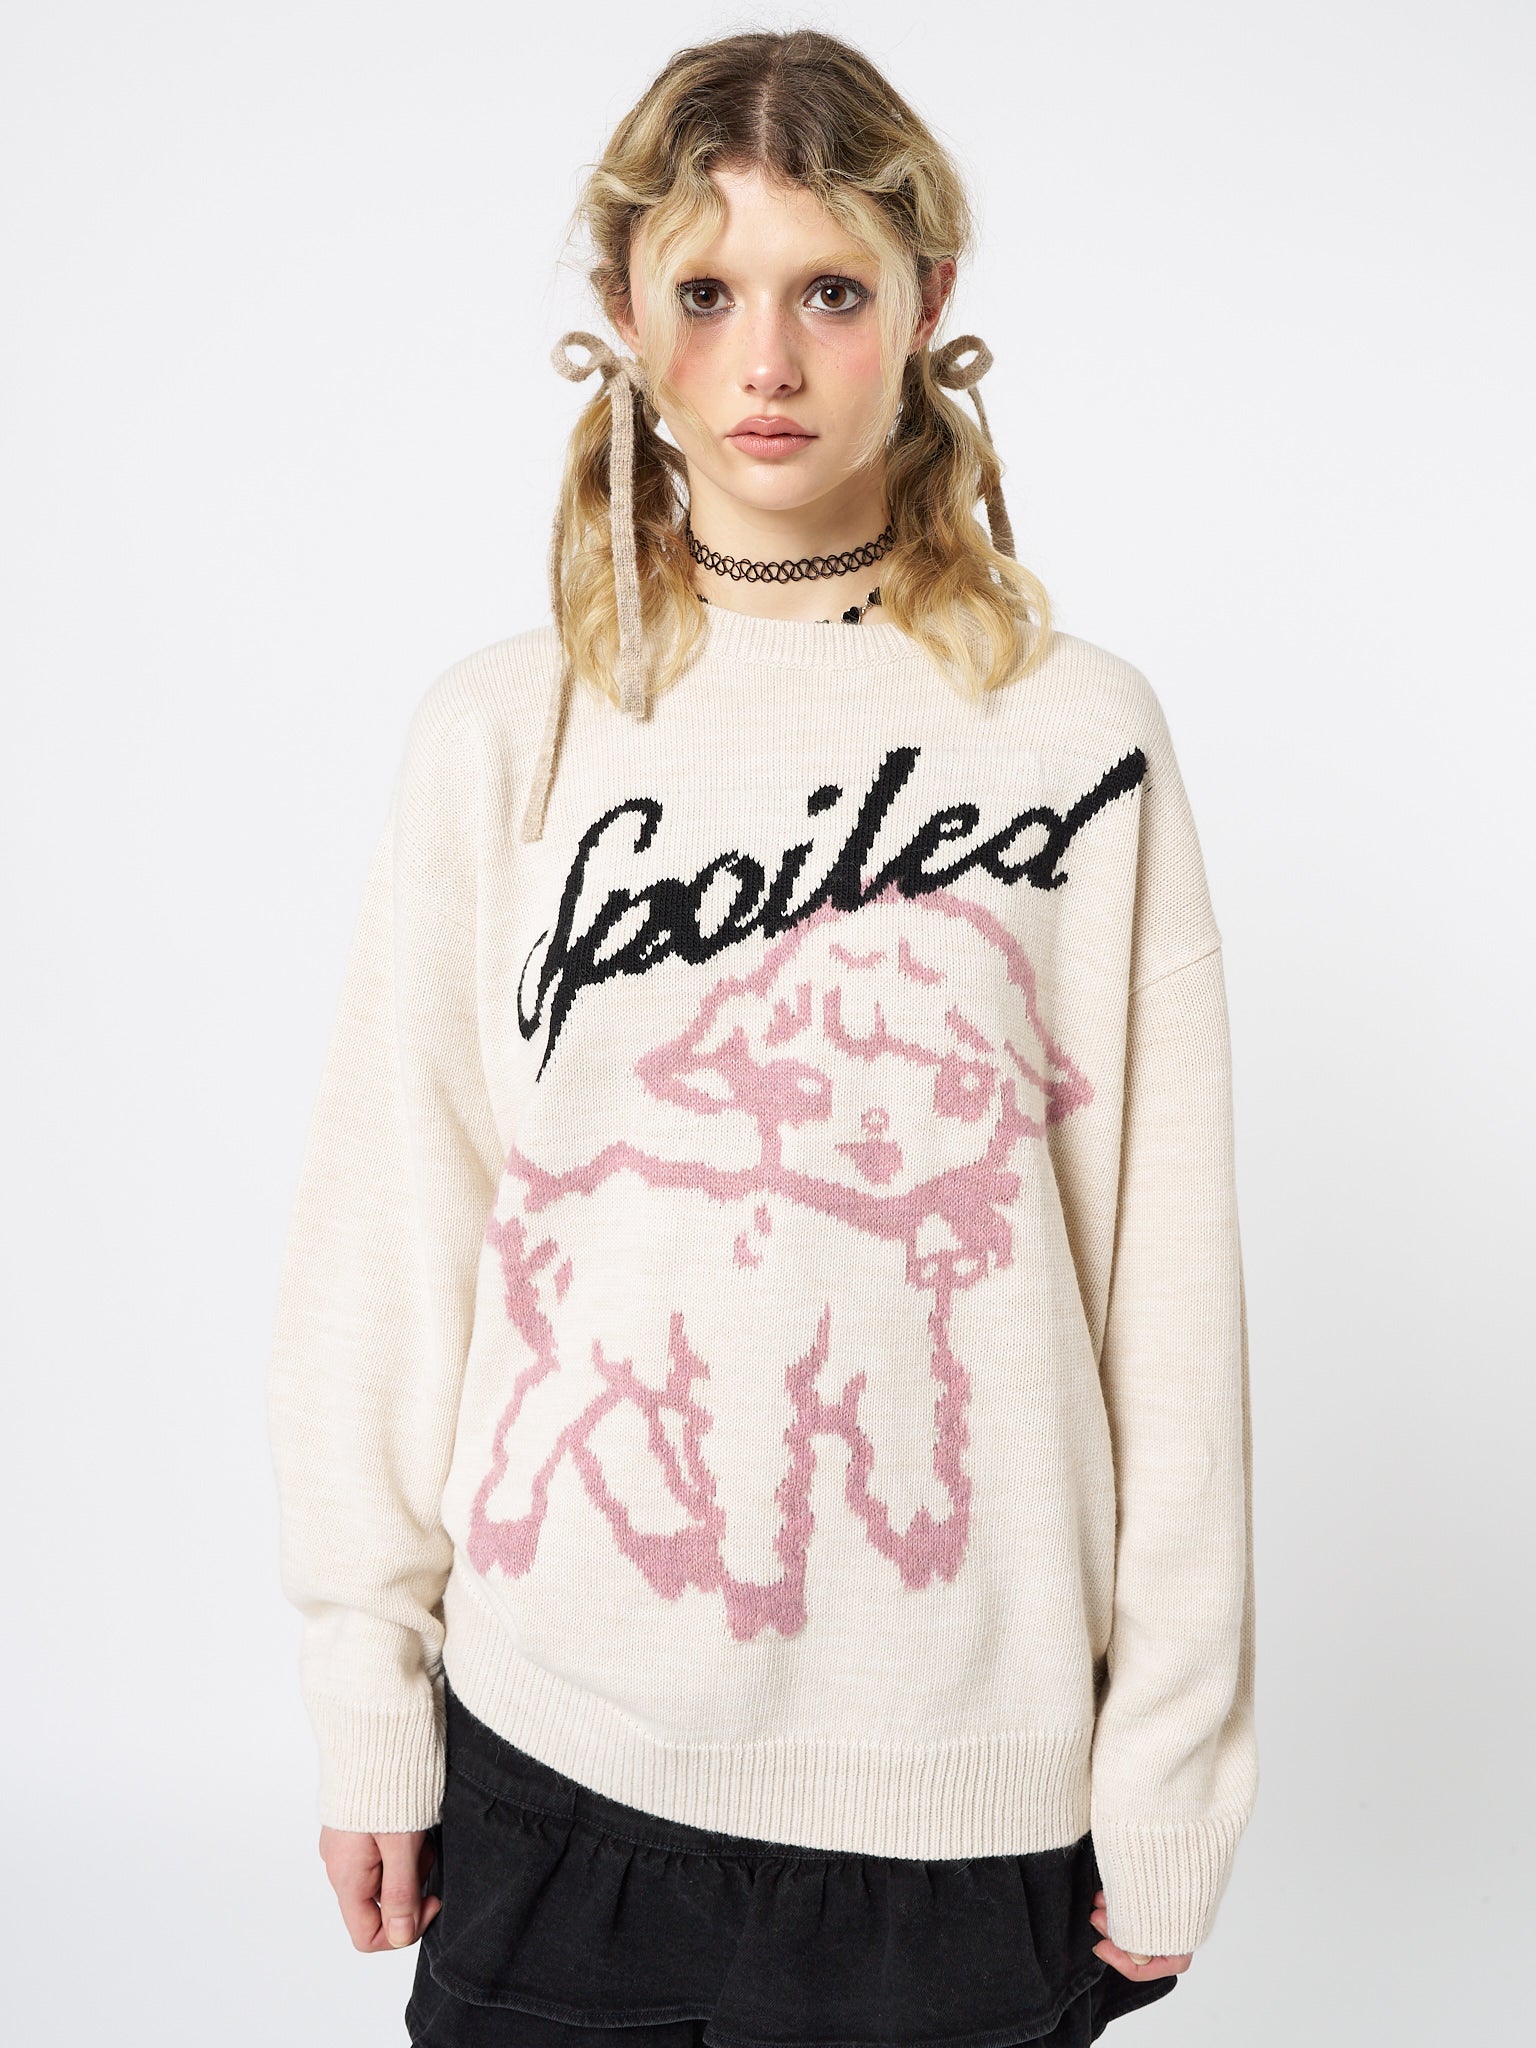 Spoiled Sheep Graphic Knitted Sweater - Minga  US